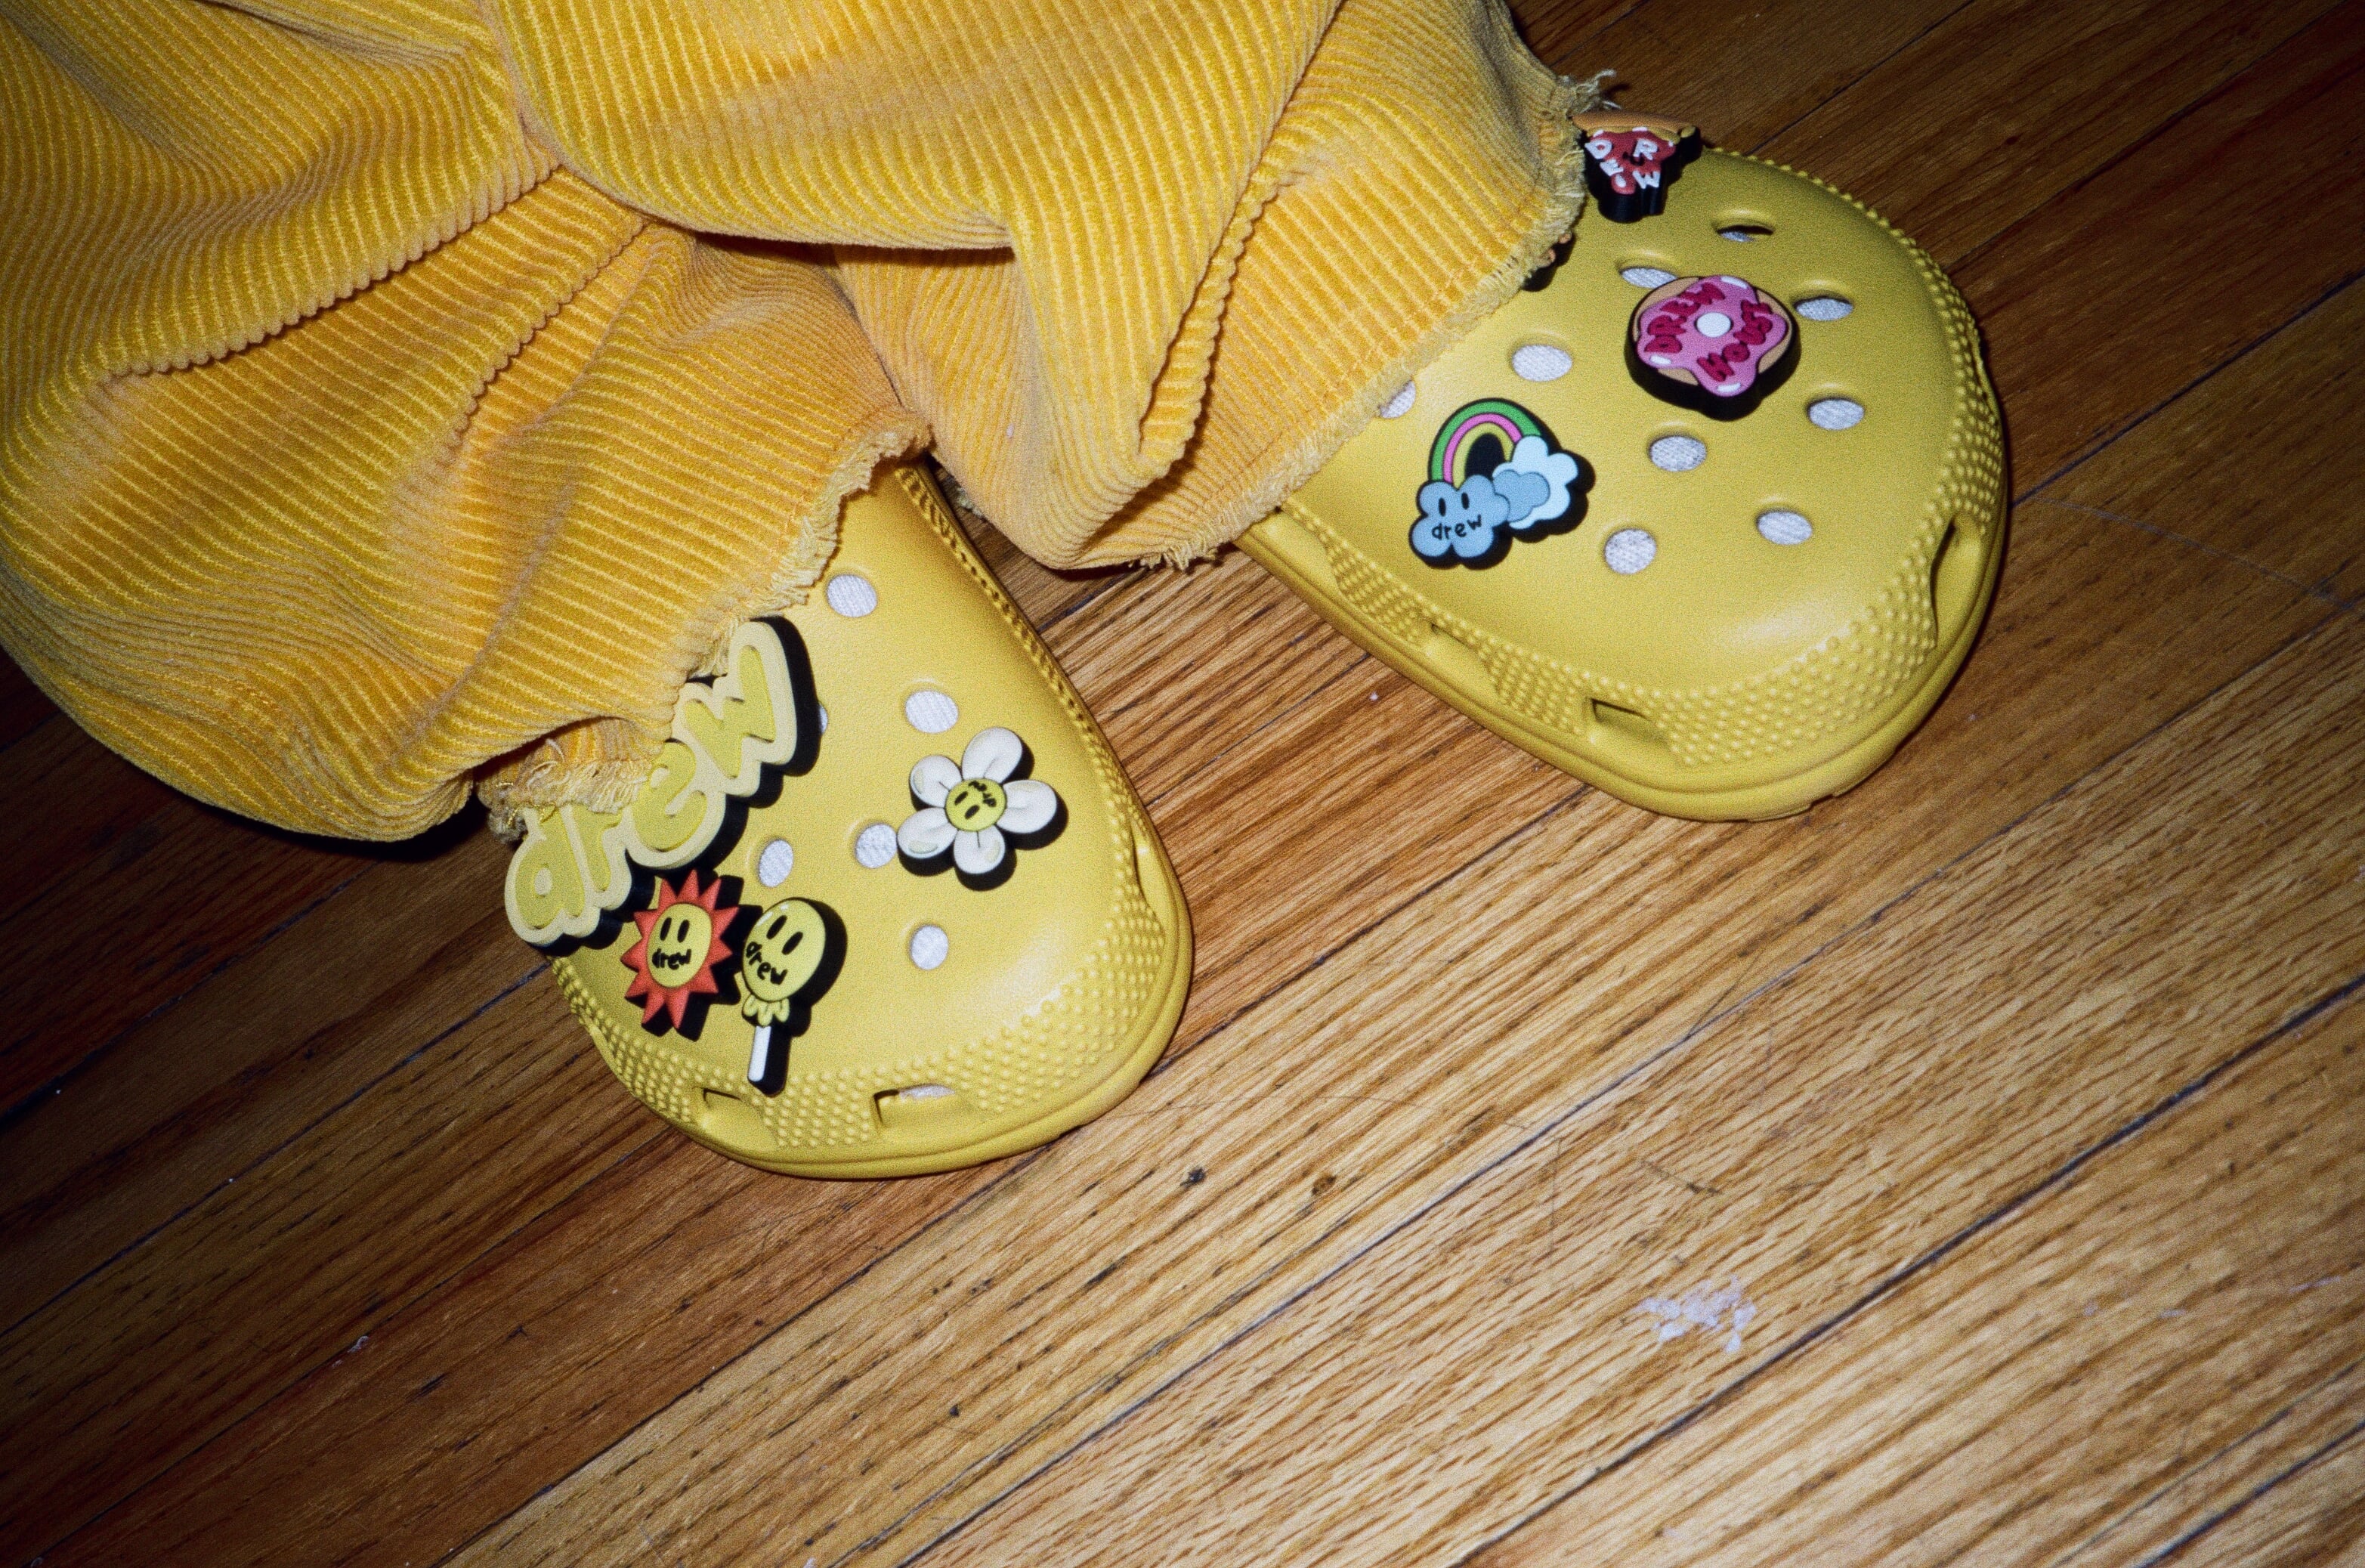 Justin Bieber's slippers from his House of Drew fashion label have